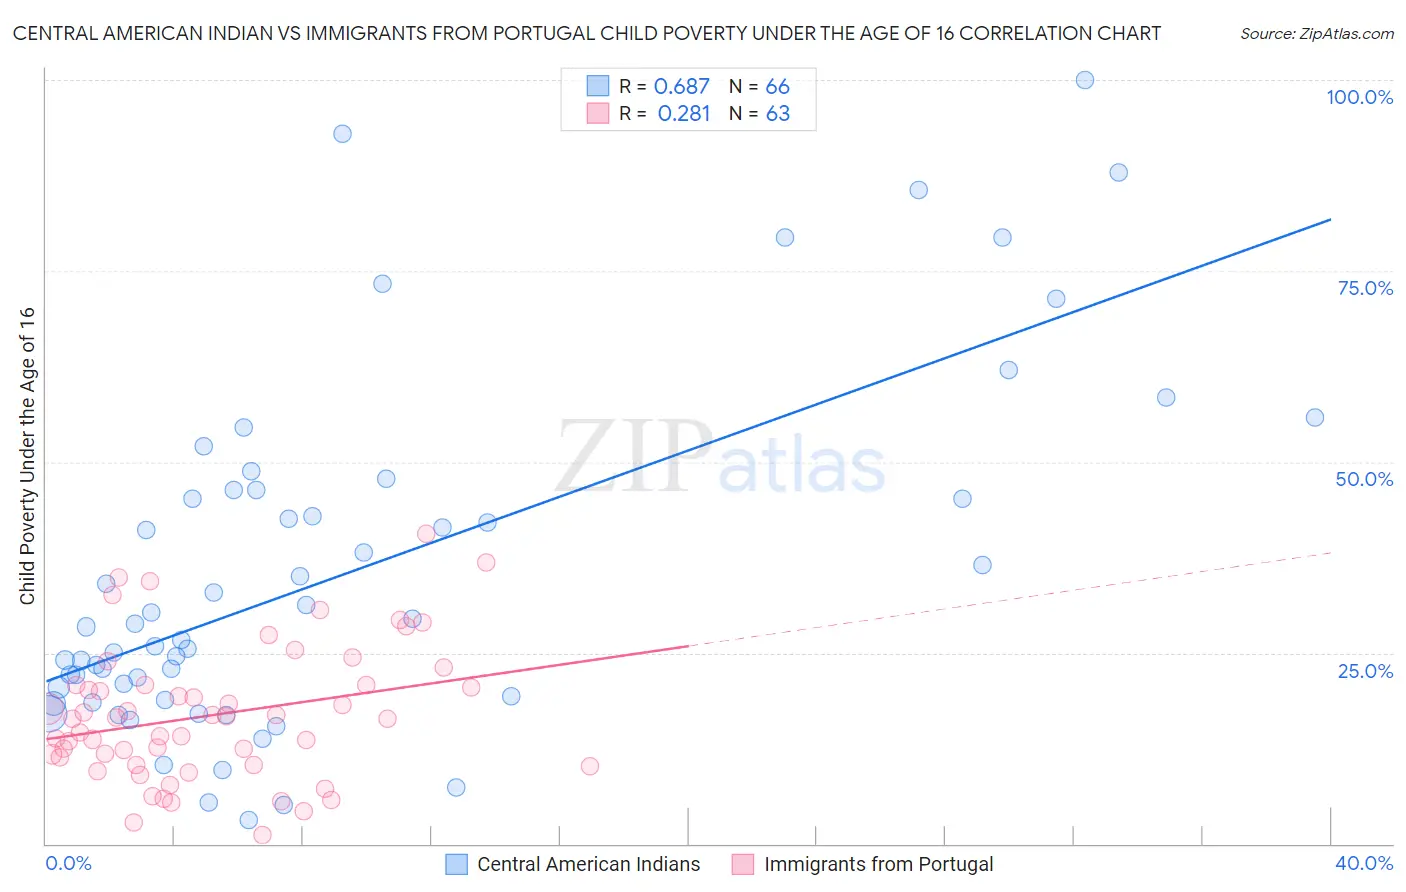 Central American Indian vs Immigrants from Portugal Child Poverty Under the Age of 16